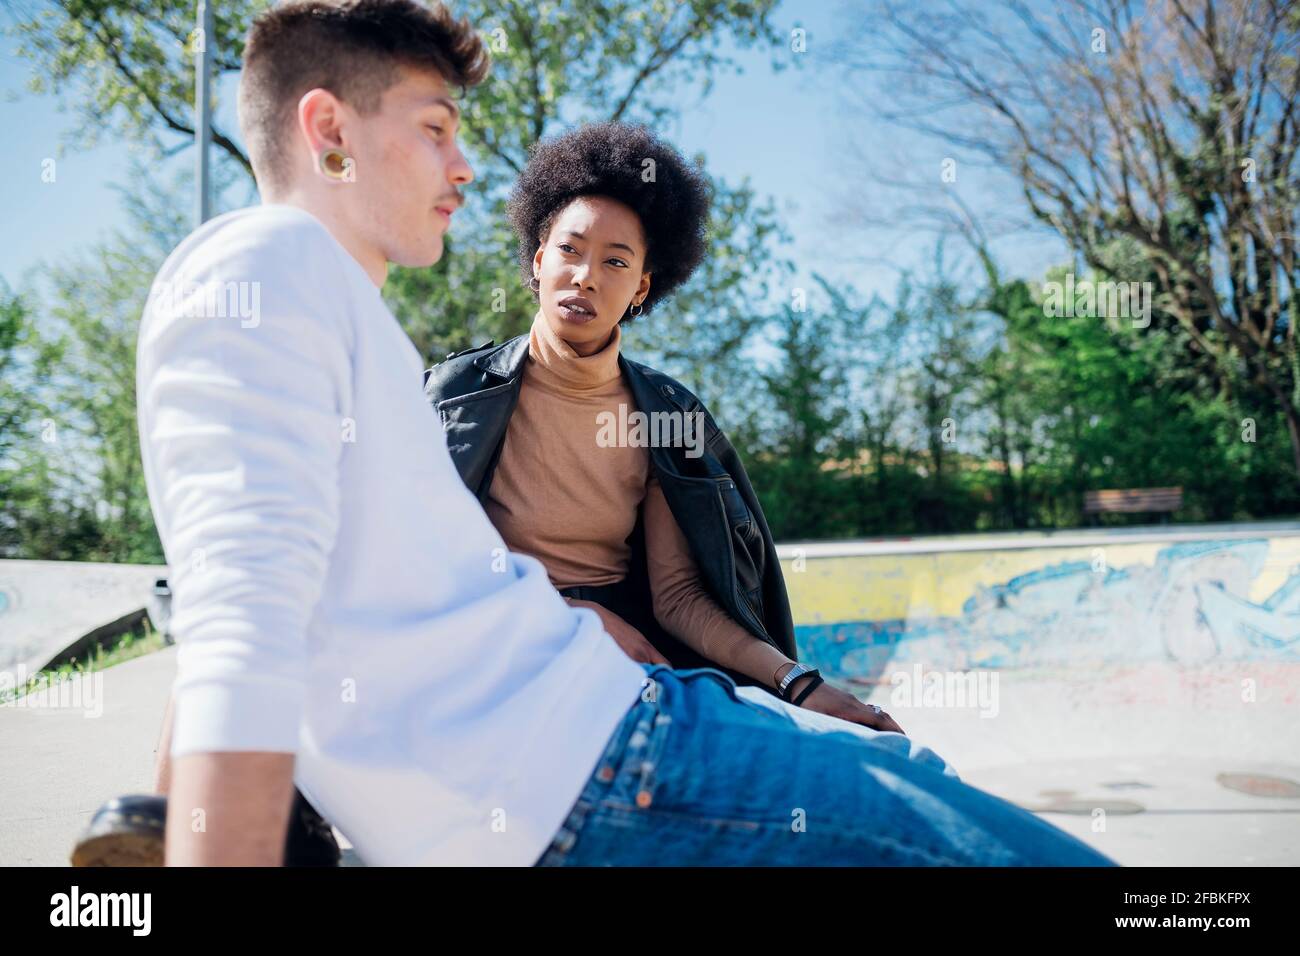 Multi ethnic couple sitting at skateboard park during sunny day Stock Photo